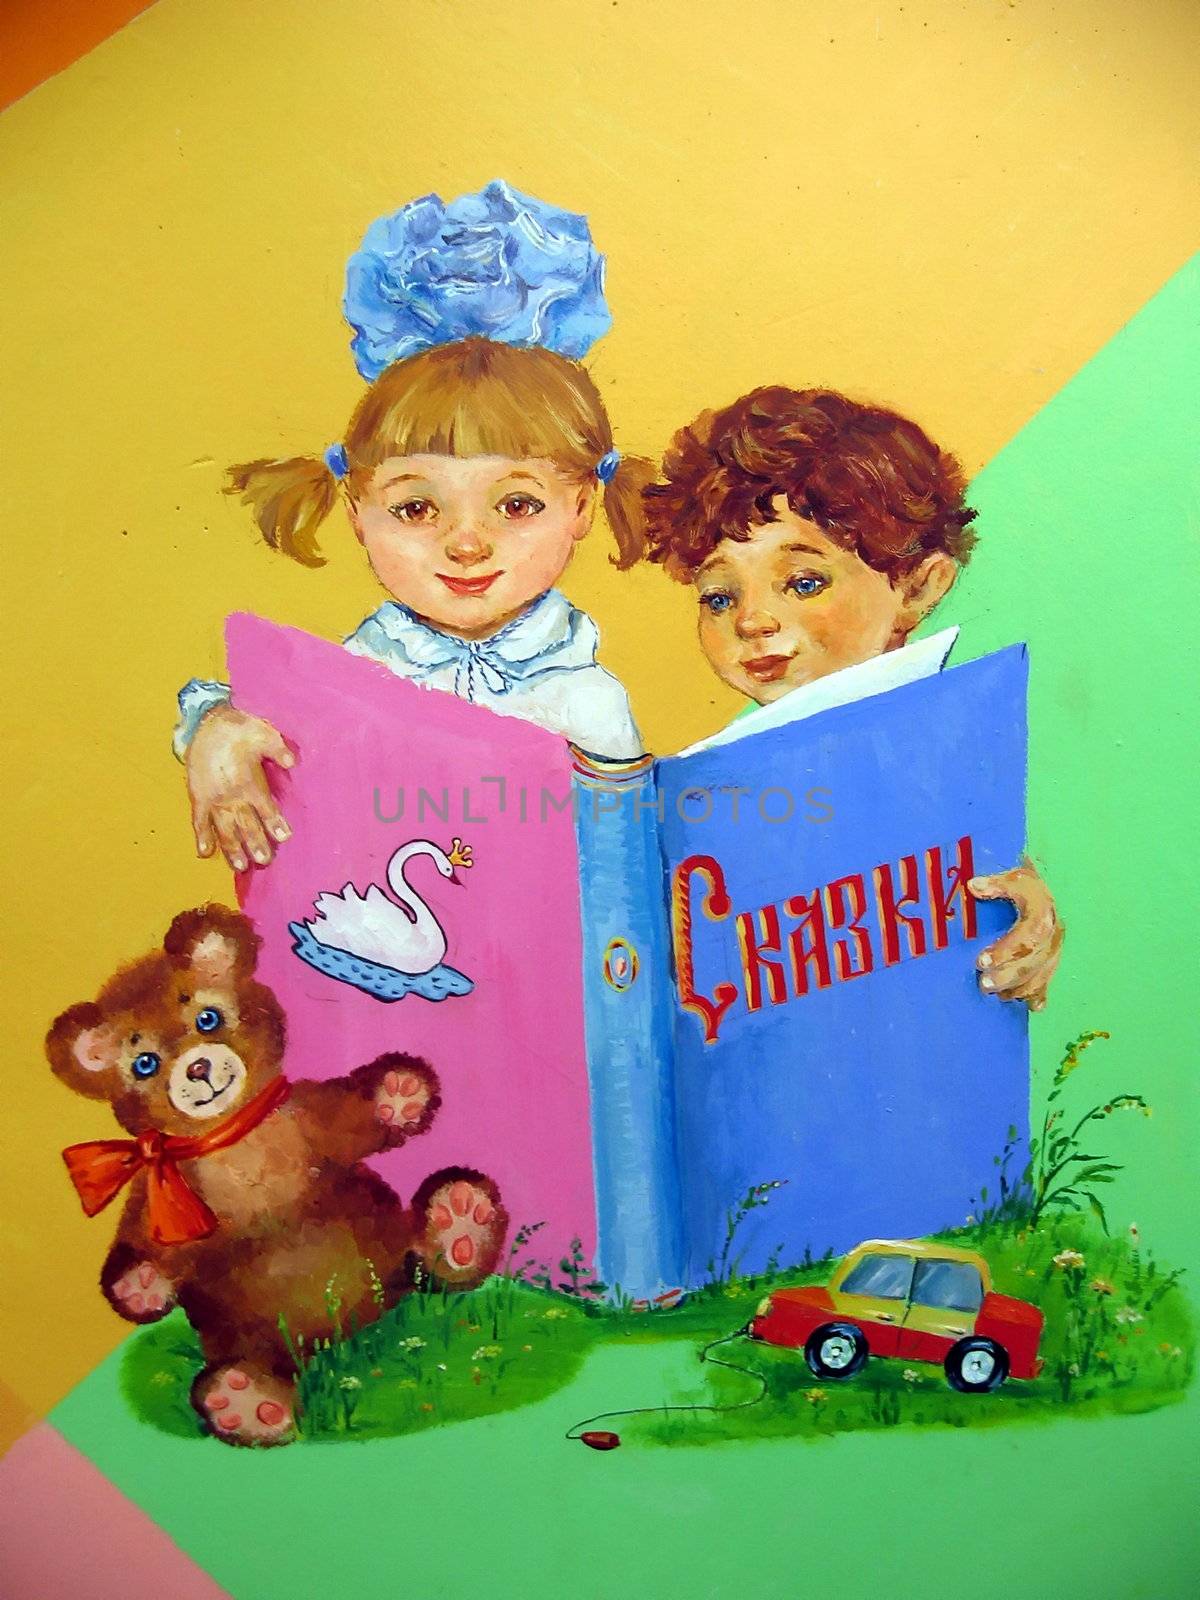 Painted on the colored wall boy and girl which read book